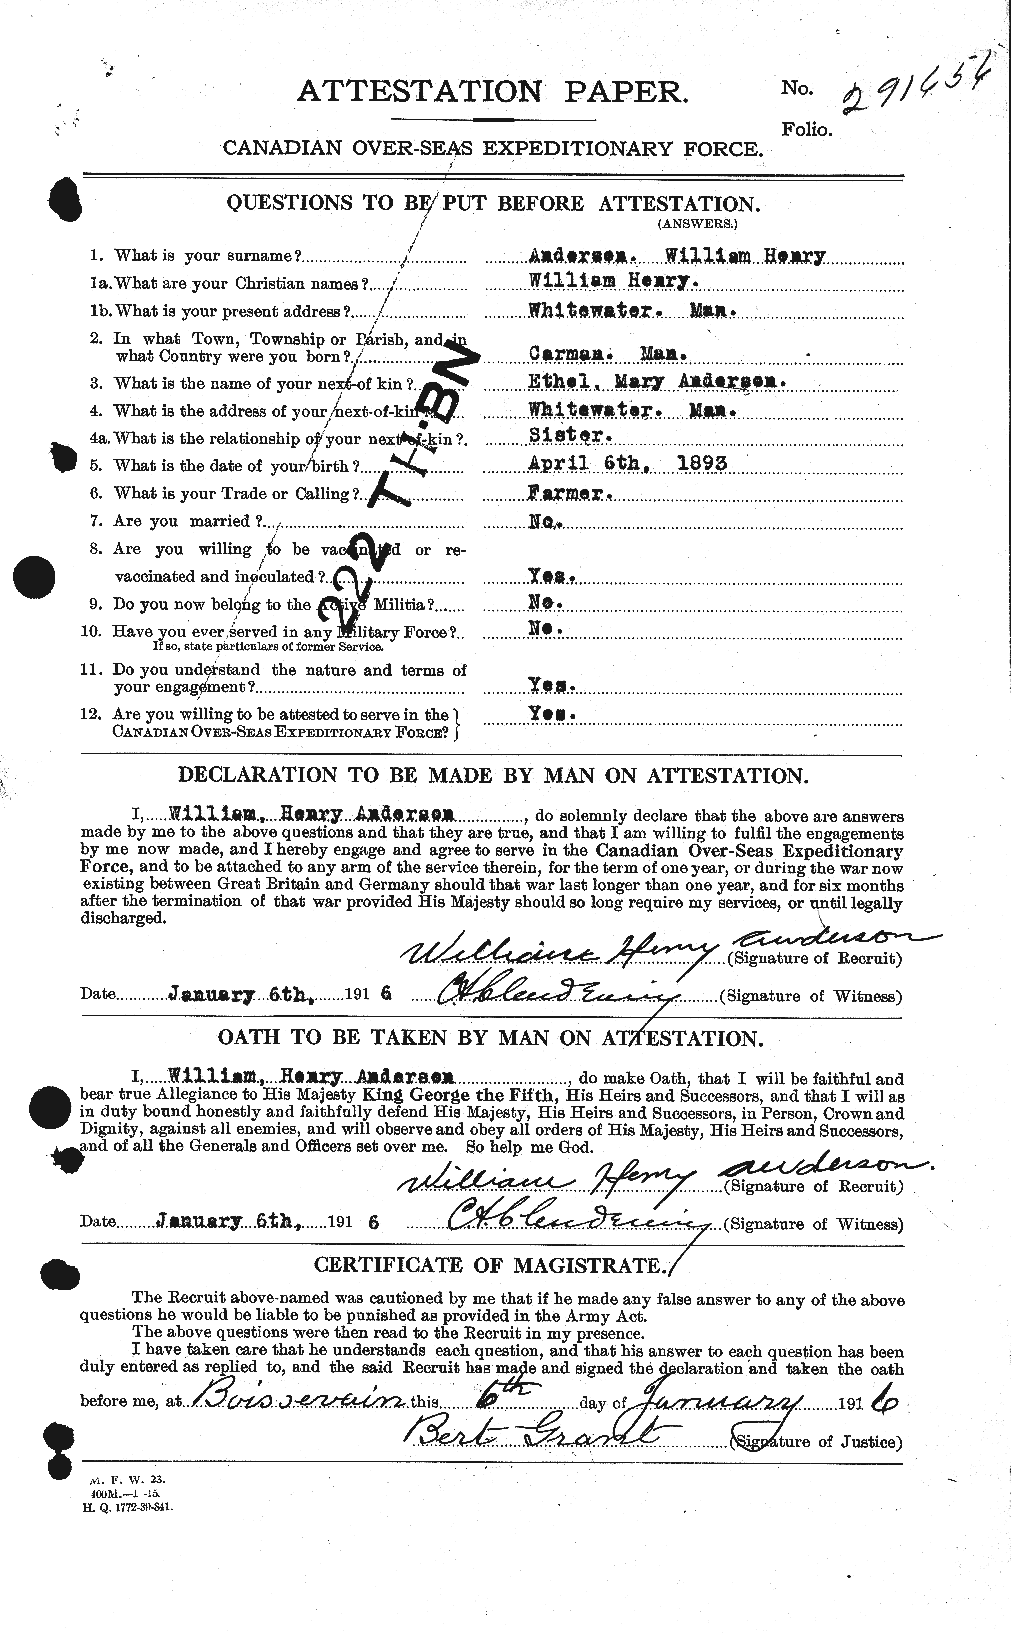 Personnel Records of the First World War - CEF 210803a